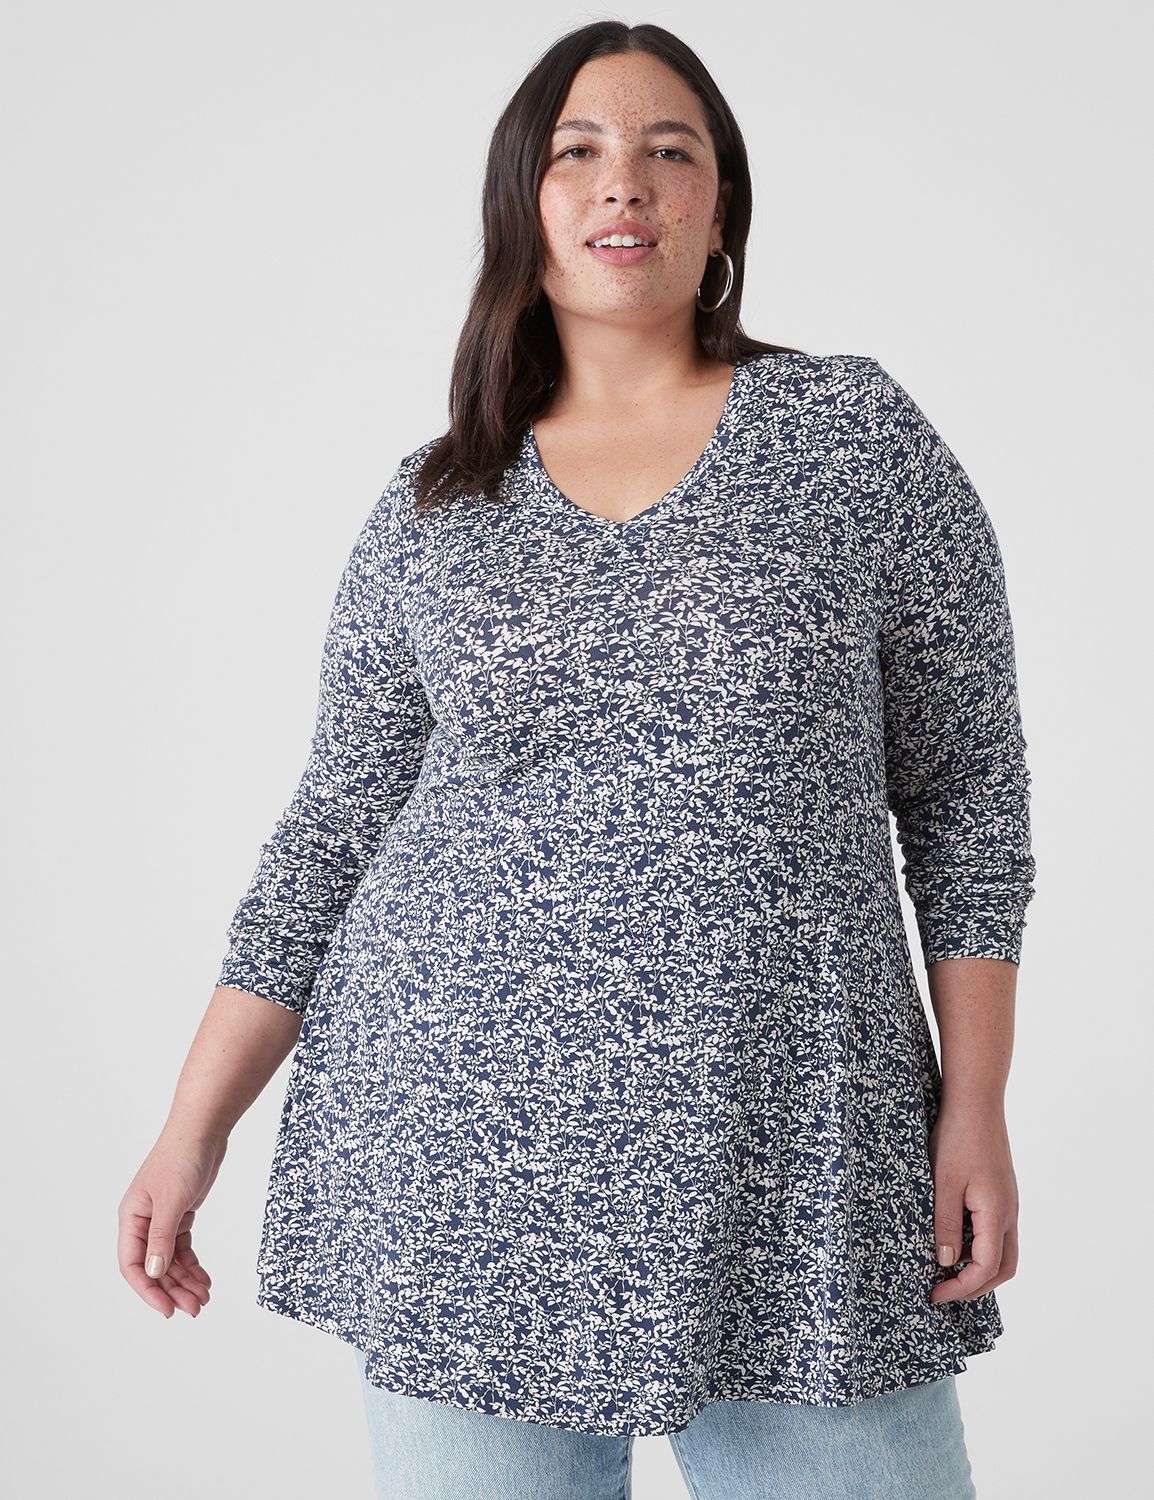 Lane Bryant Swing Long-Sleeve V-Neck Tunic 14/16 Navy Floral Small